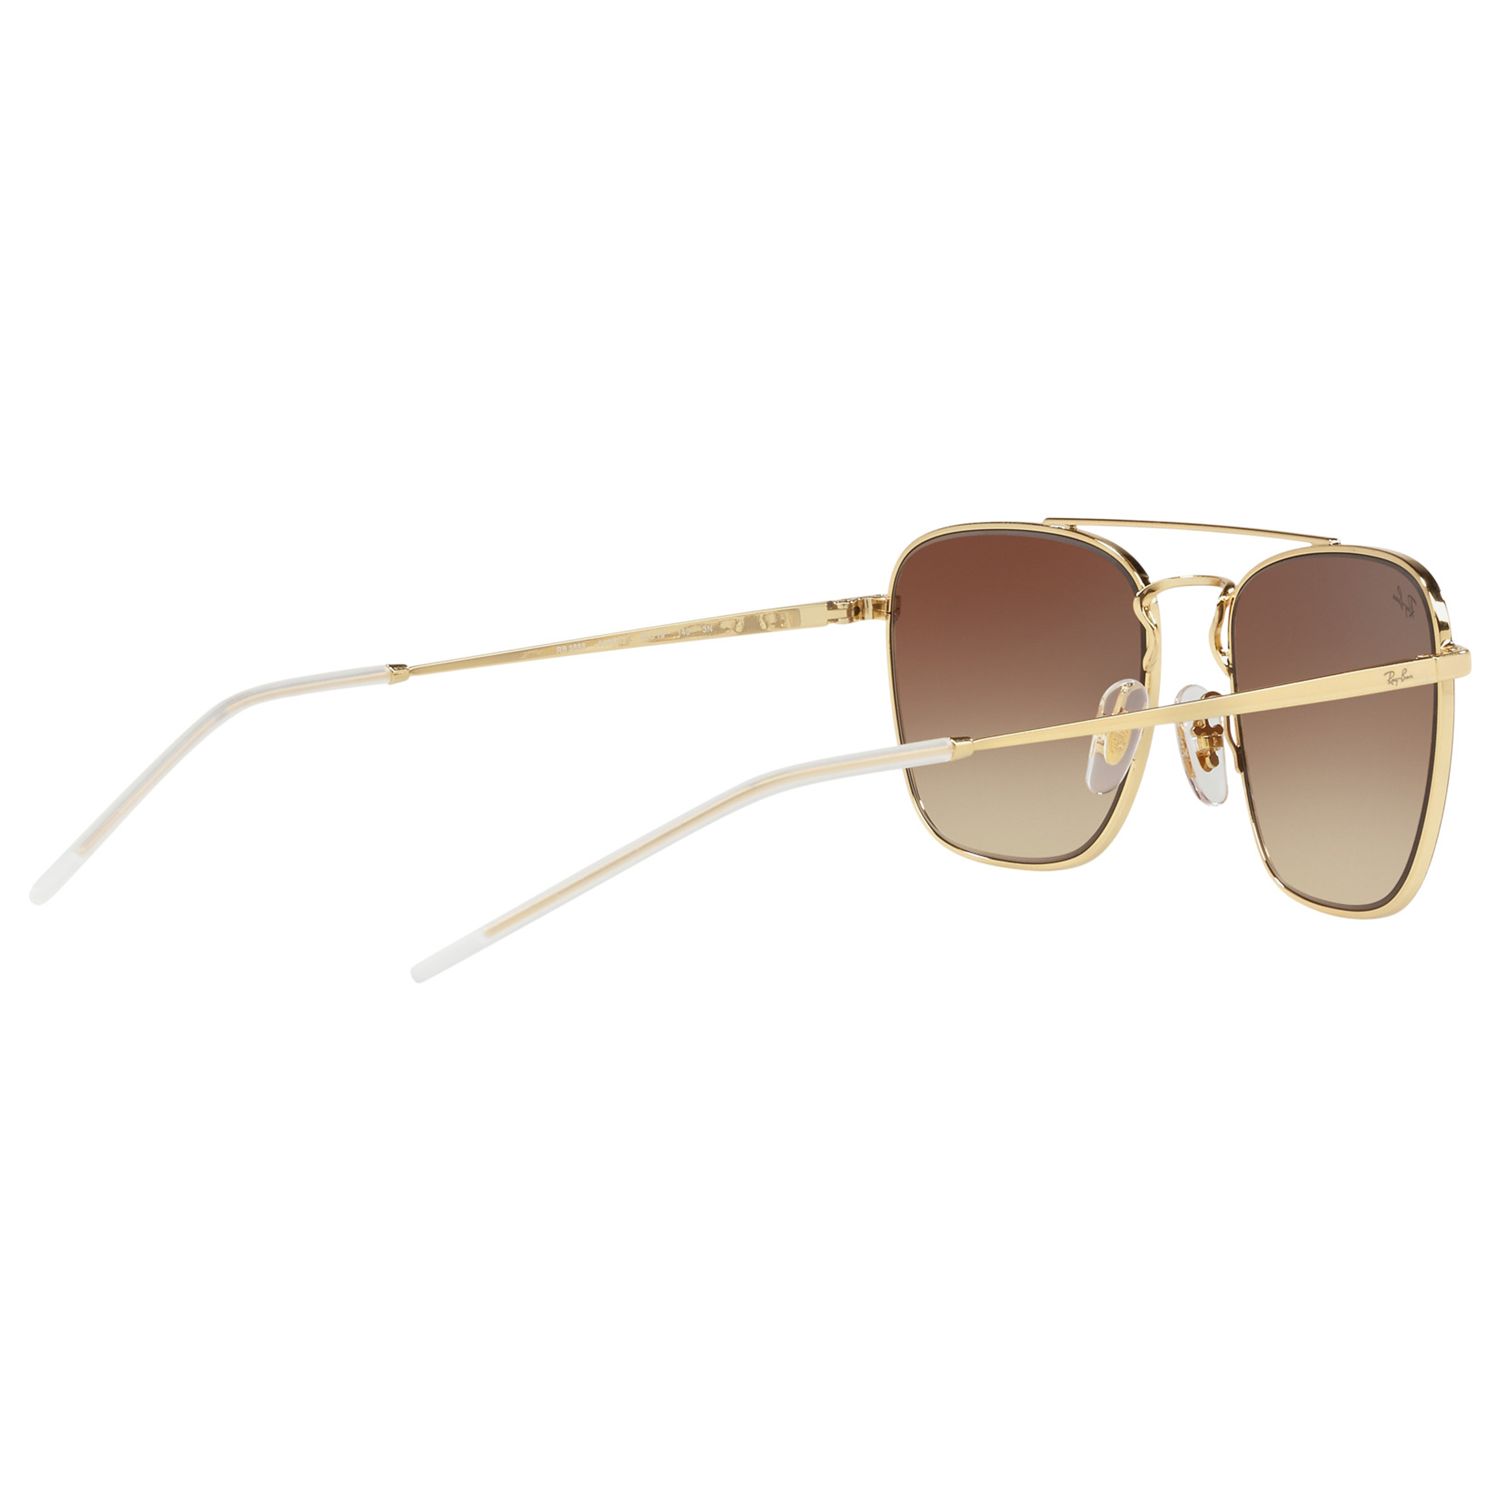 Ray-Ban RB3588 Men's Square Sunglasses, Gold/Brown Gradient